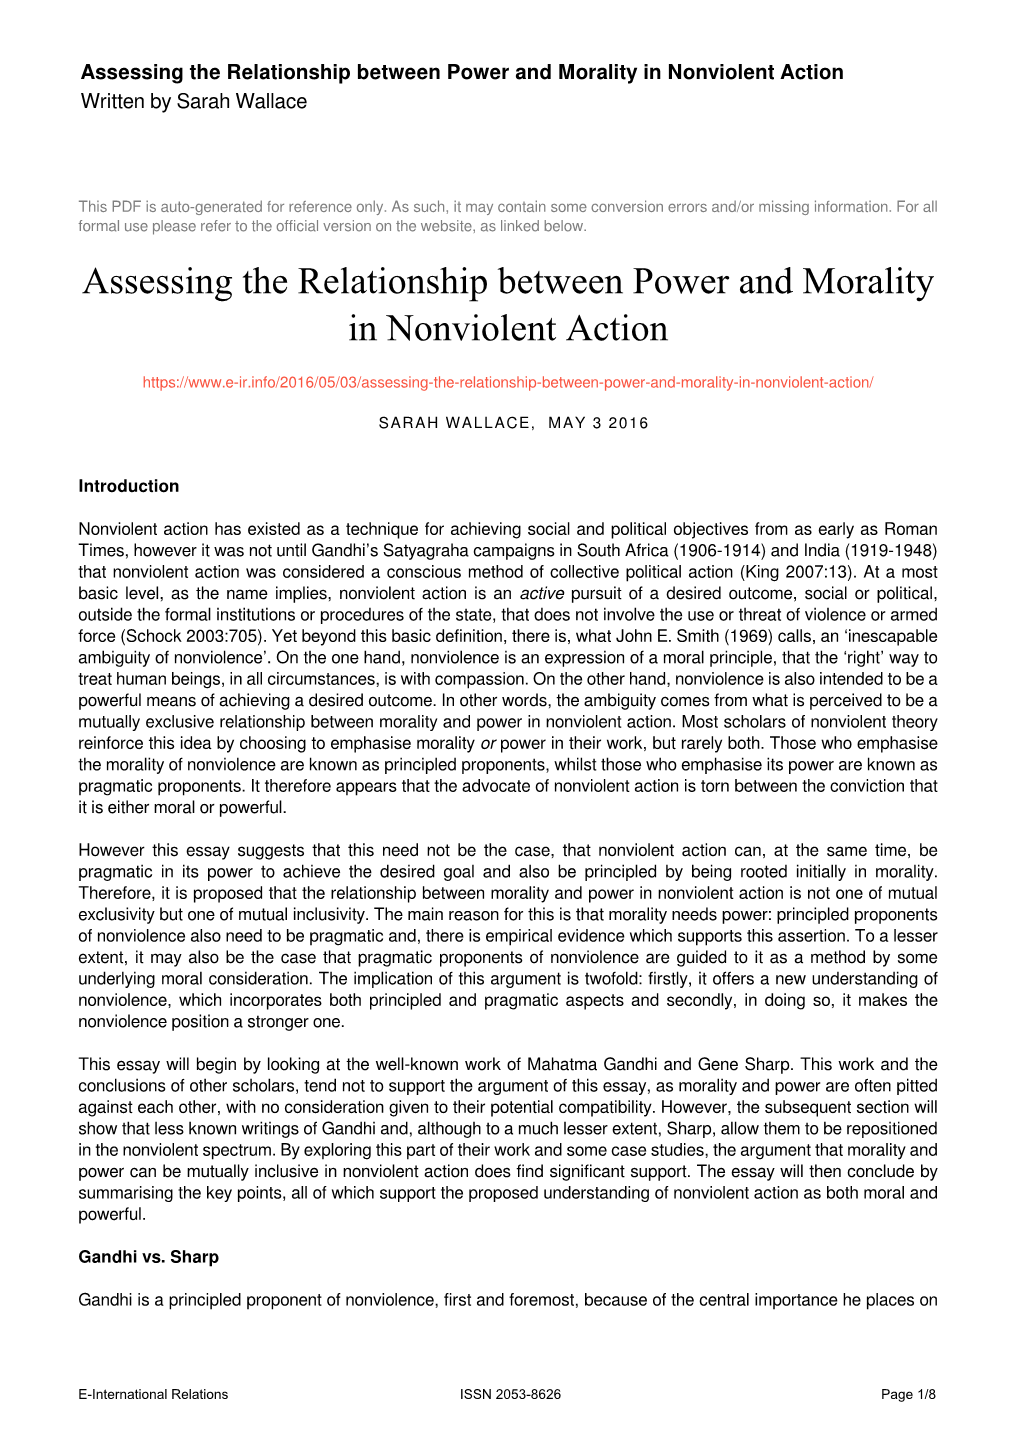 Assessing the Relationship Between Power and Morality in Nonviolent Action Written by Sarah Wallace